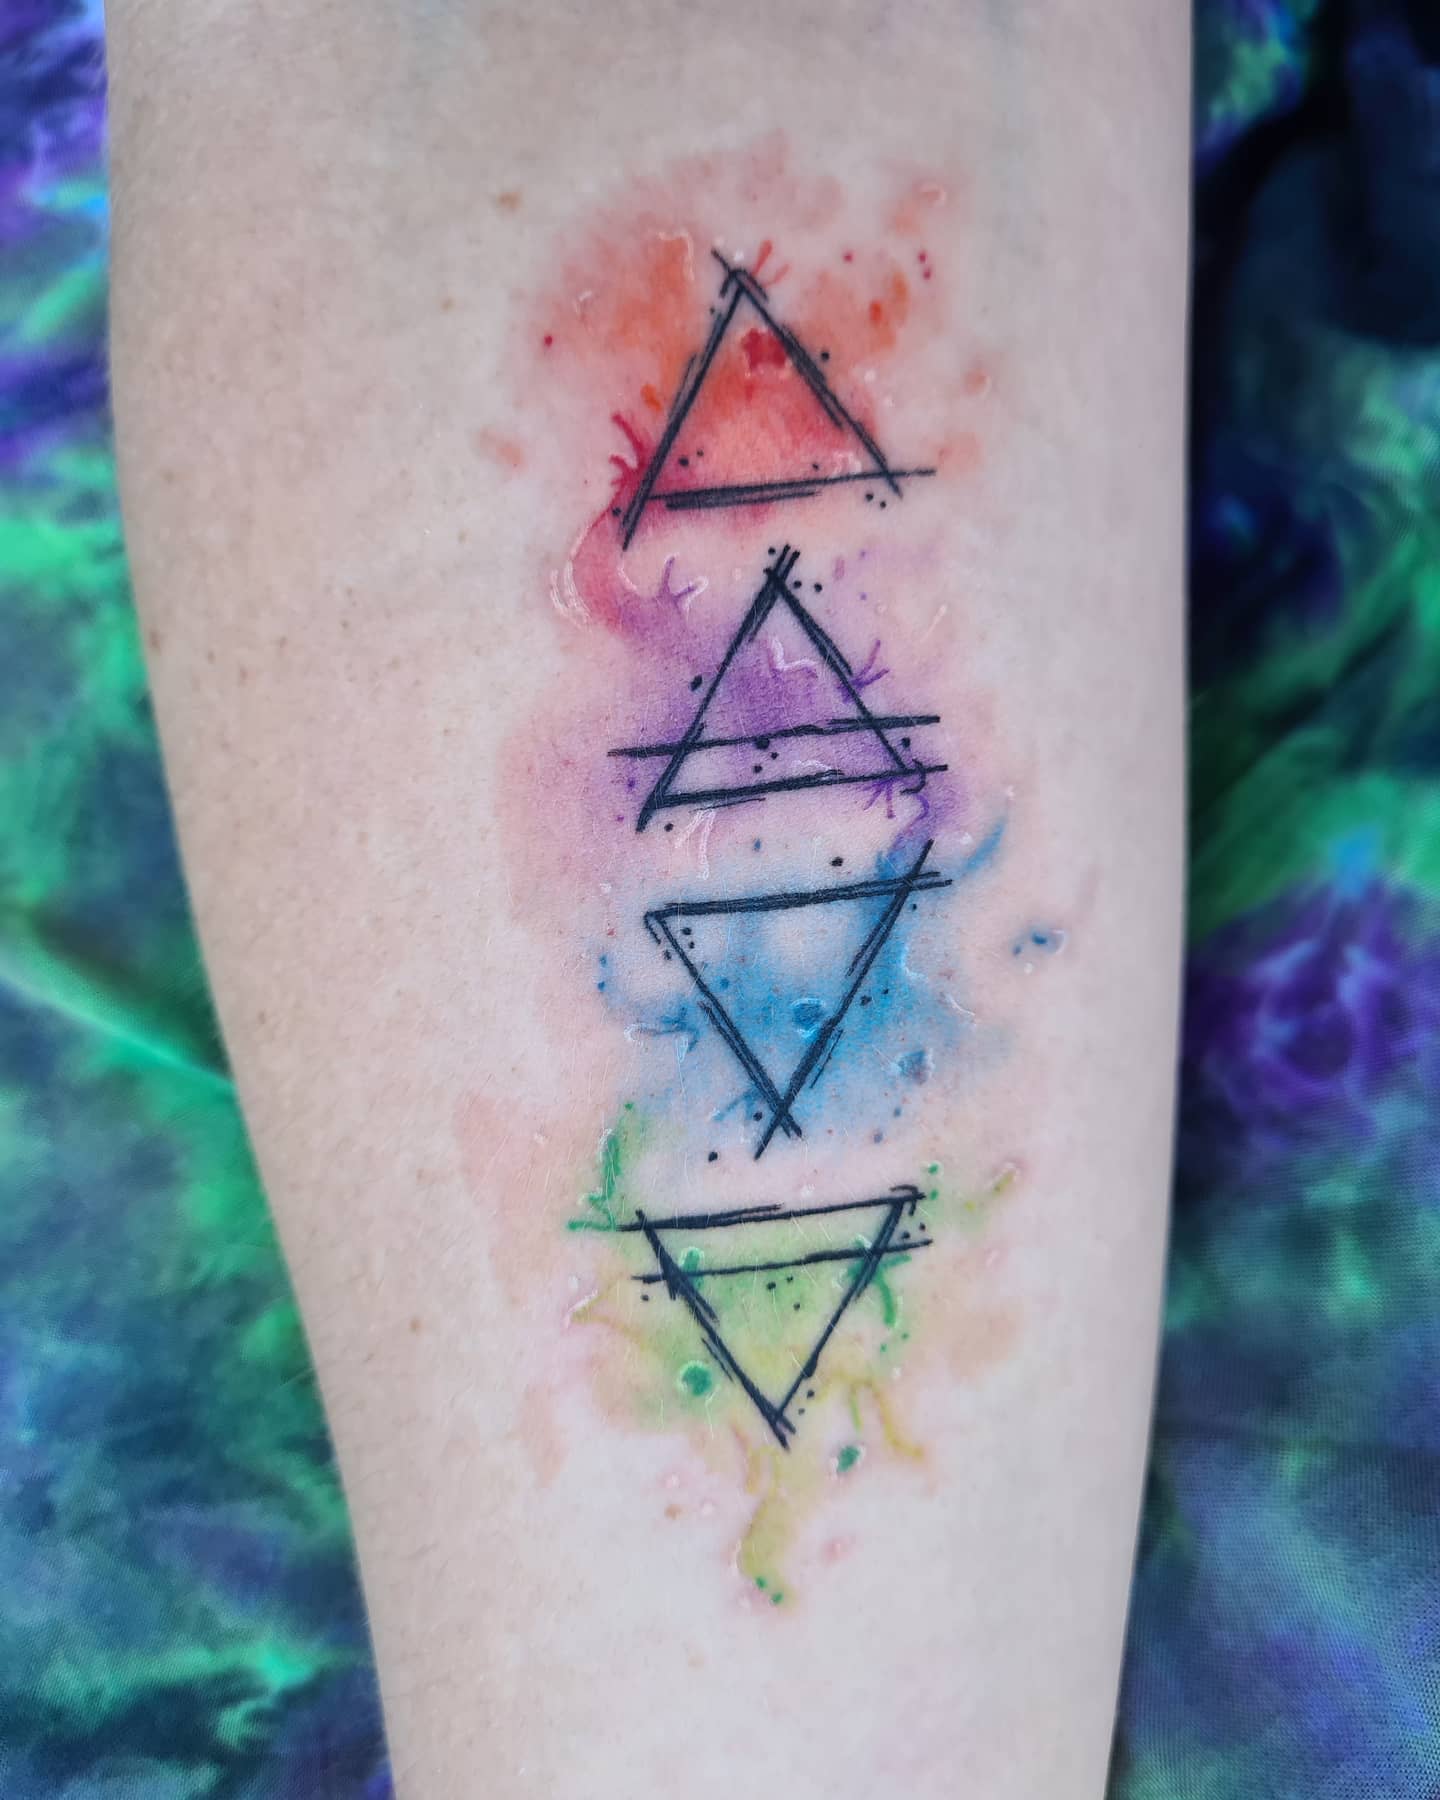 The Top 27 Element Tattoo Ideas - 2022 (Inspiration Guide)